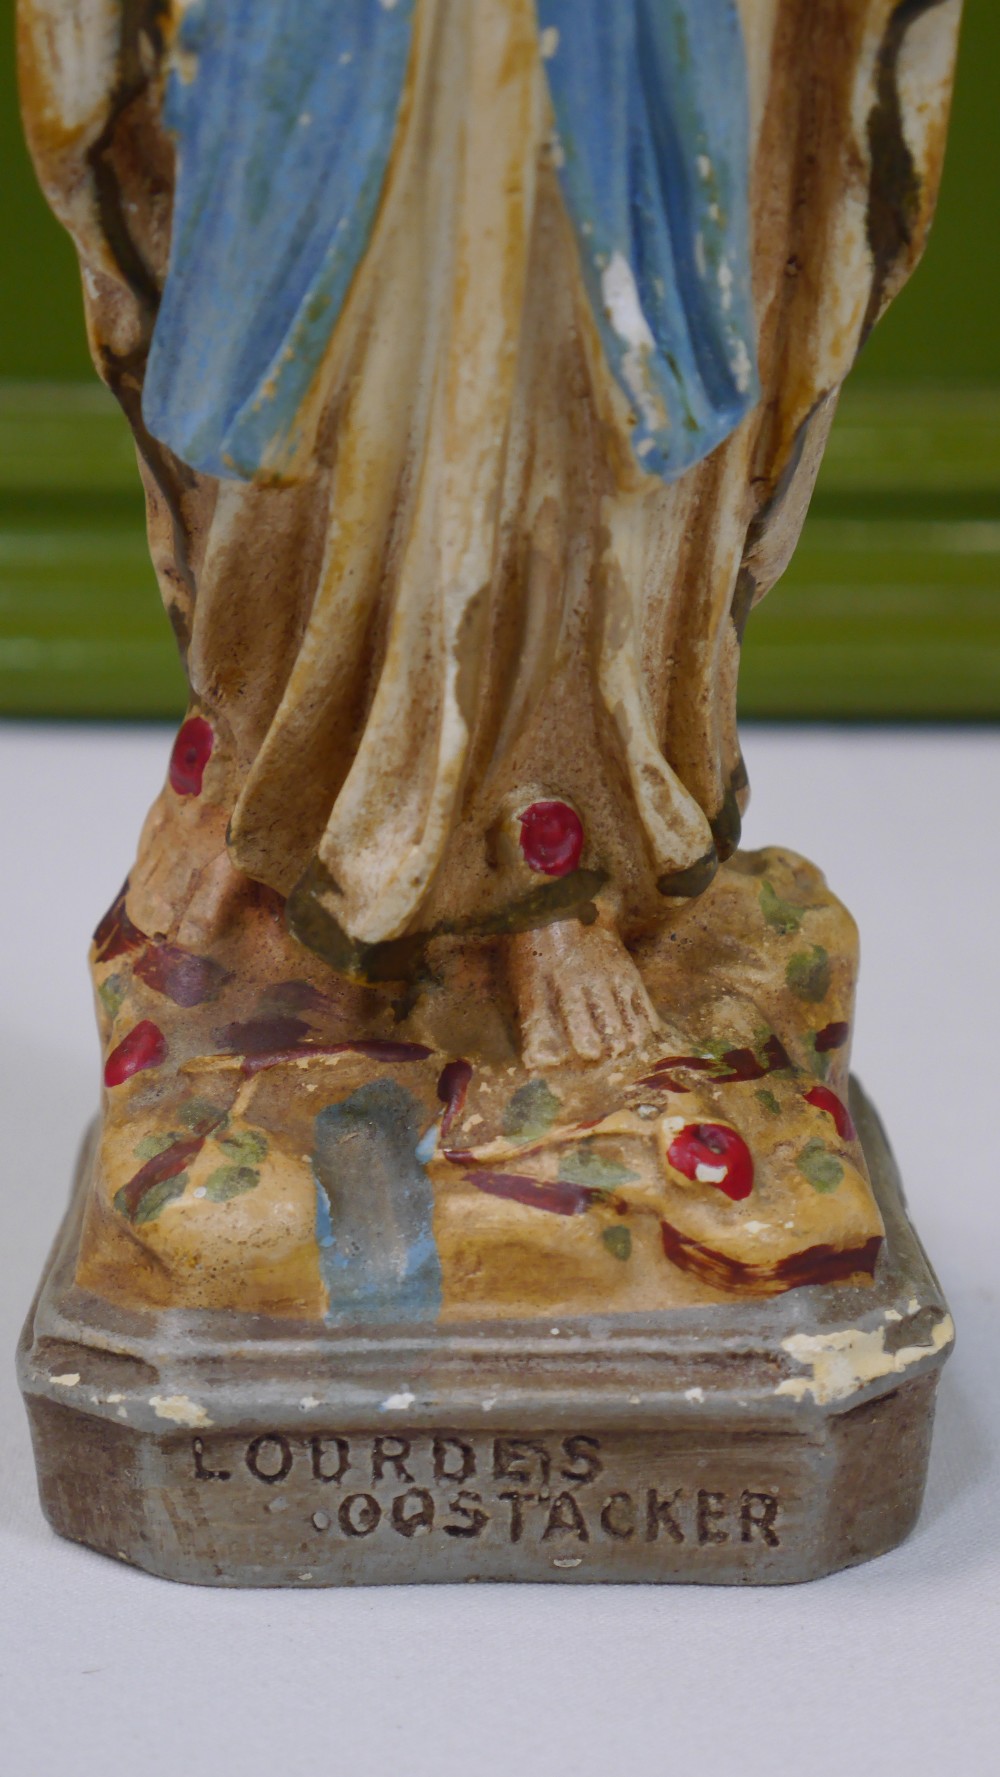 Virgin Mary Our Lady of Lourdes Oostakker Bisque Porcelain Religious Statue - Image 6 of 7